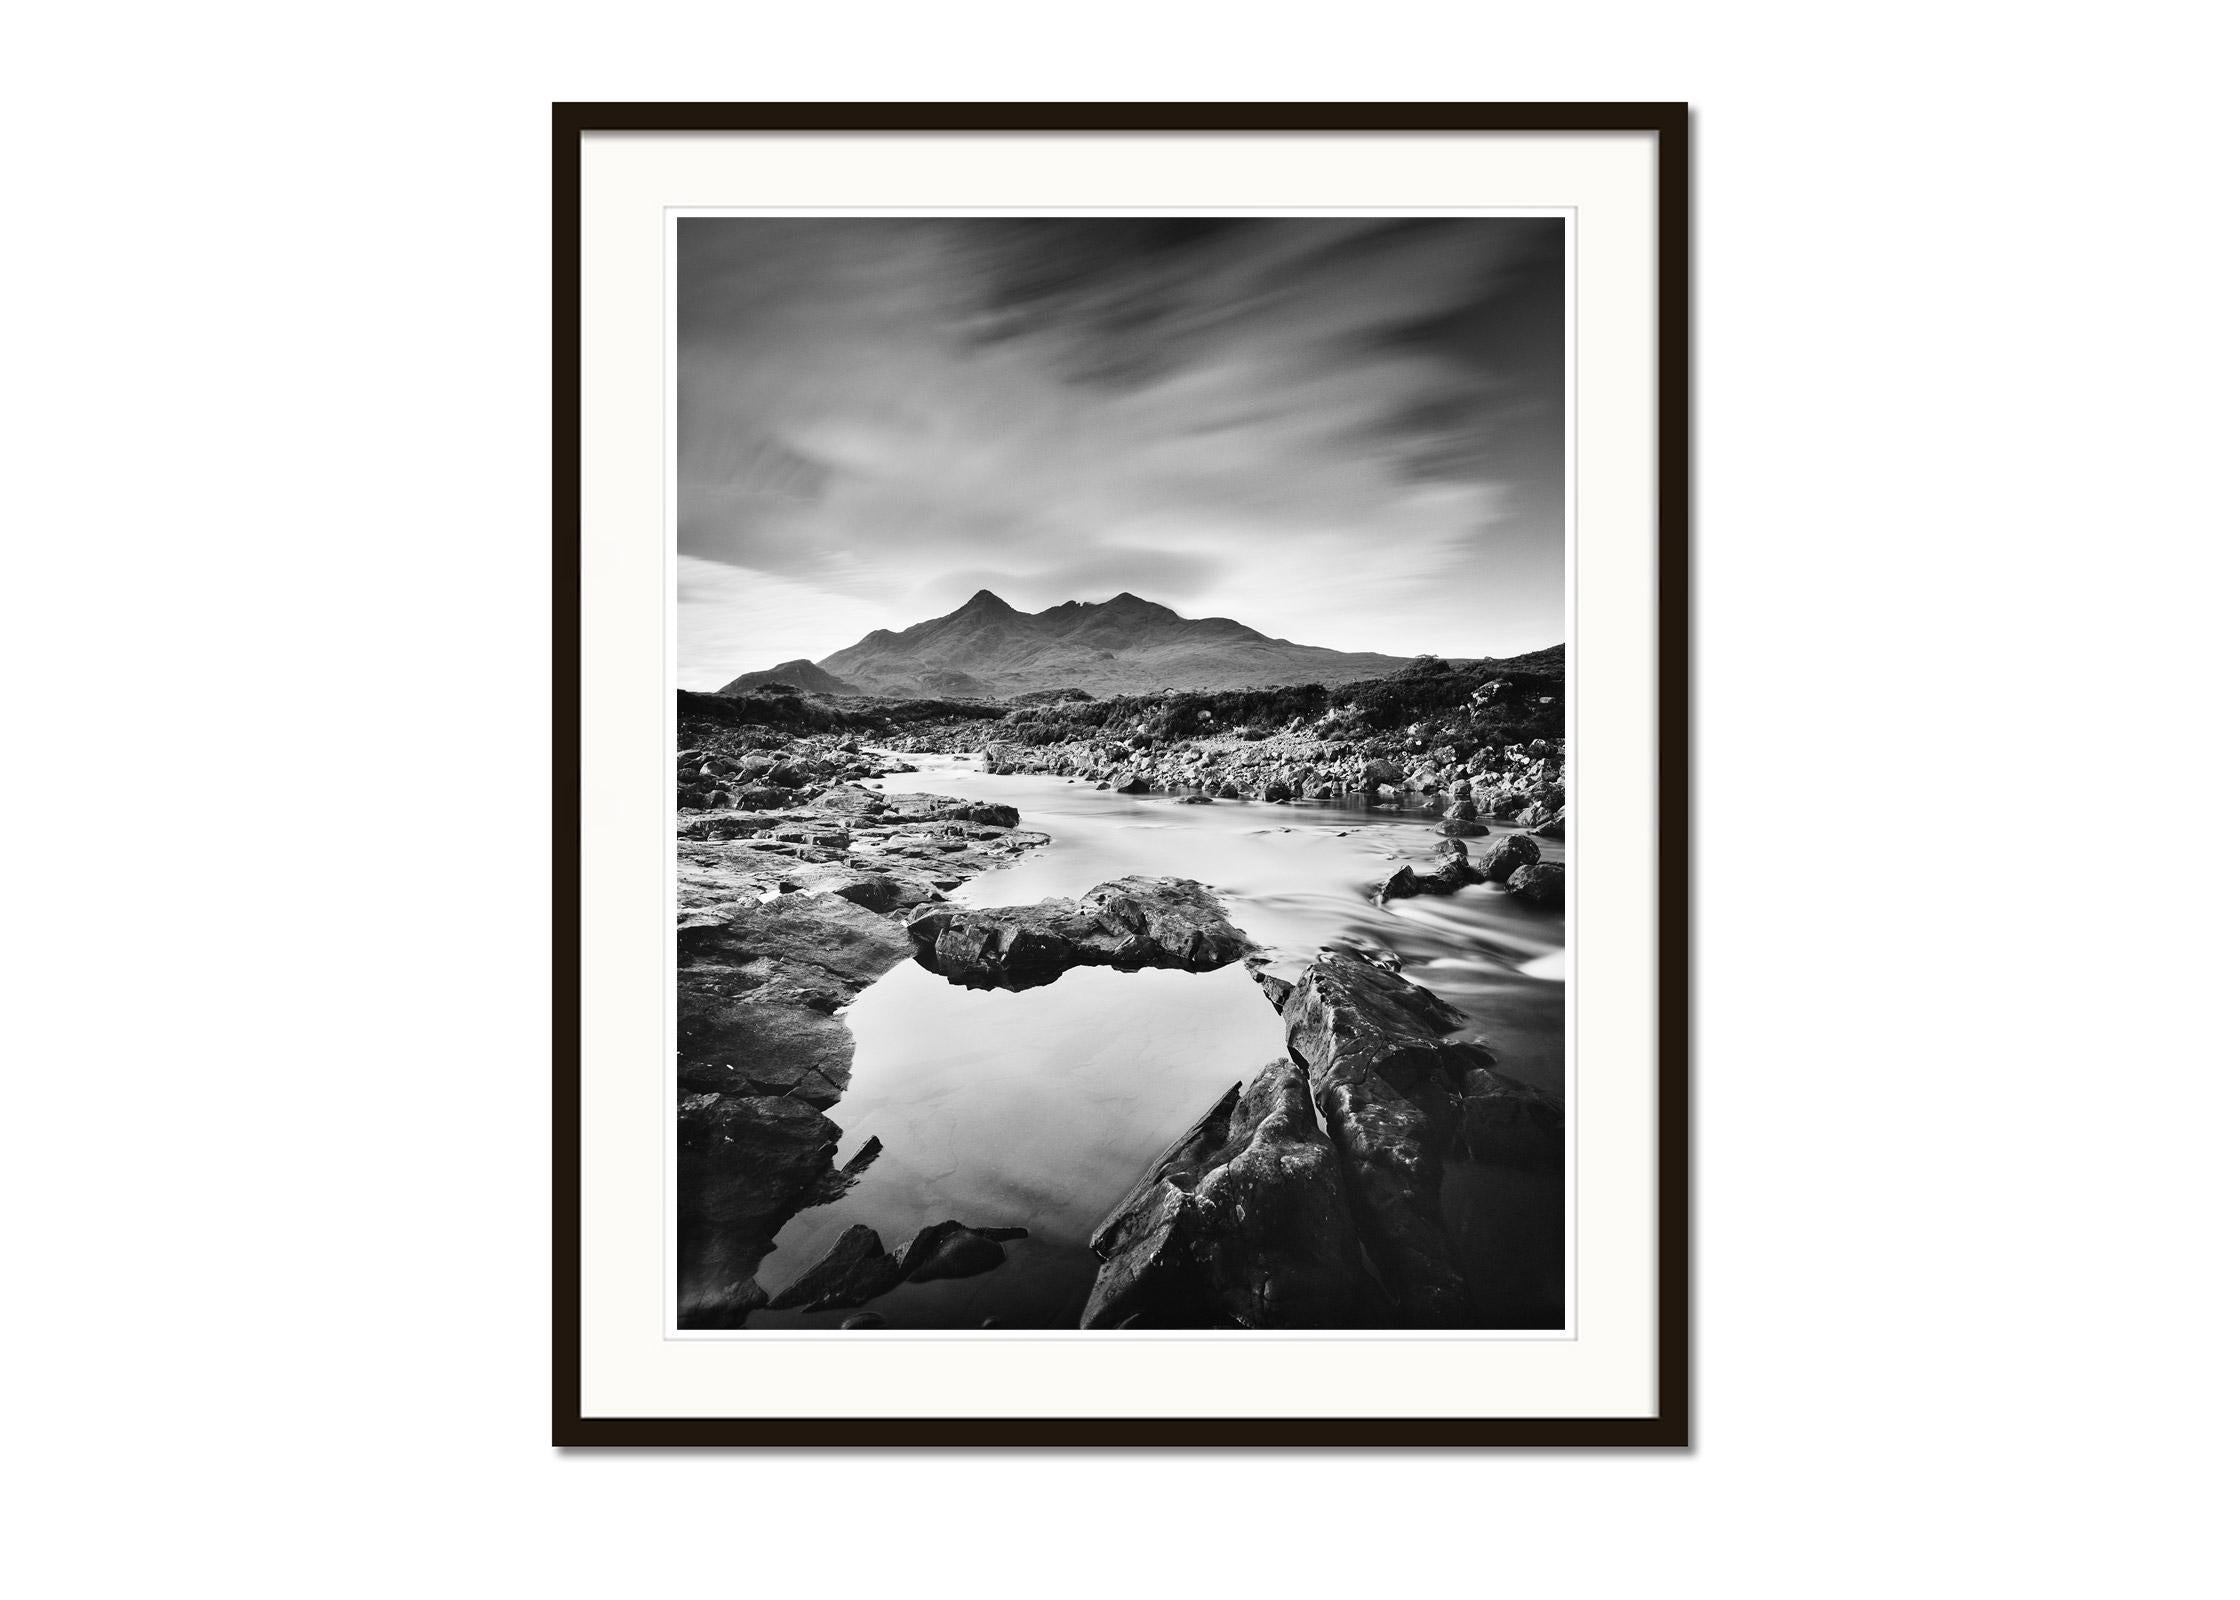 Black and White Fine Art long Exposure Landscape Photography. River with beautiful mountains in the highlands of Scotland. Archival pigment ink print, edition of 5. Signed, titled, dated and numbered by artist. Certificate of authenticity included.